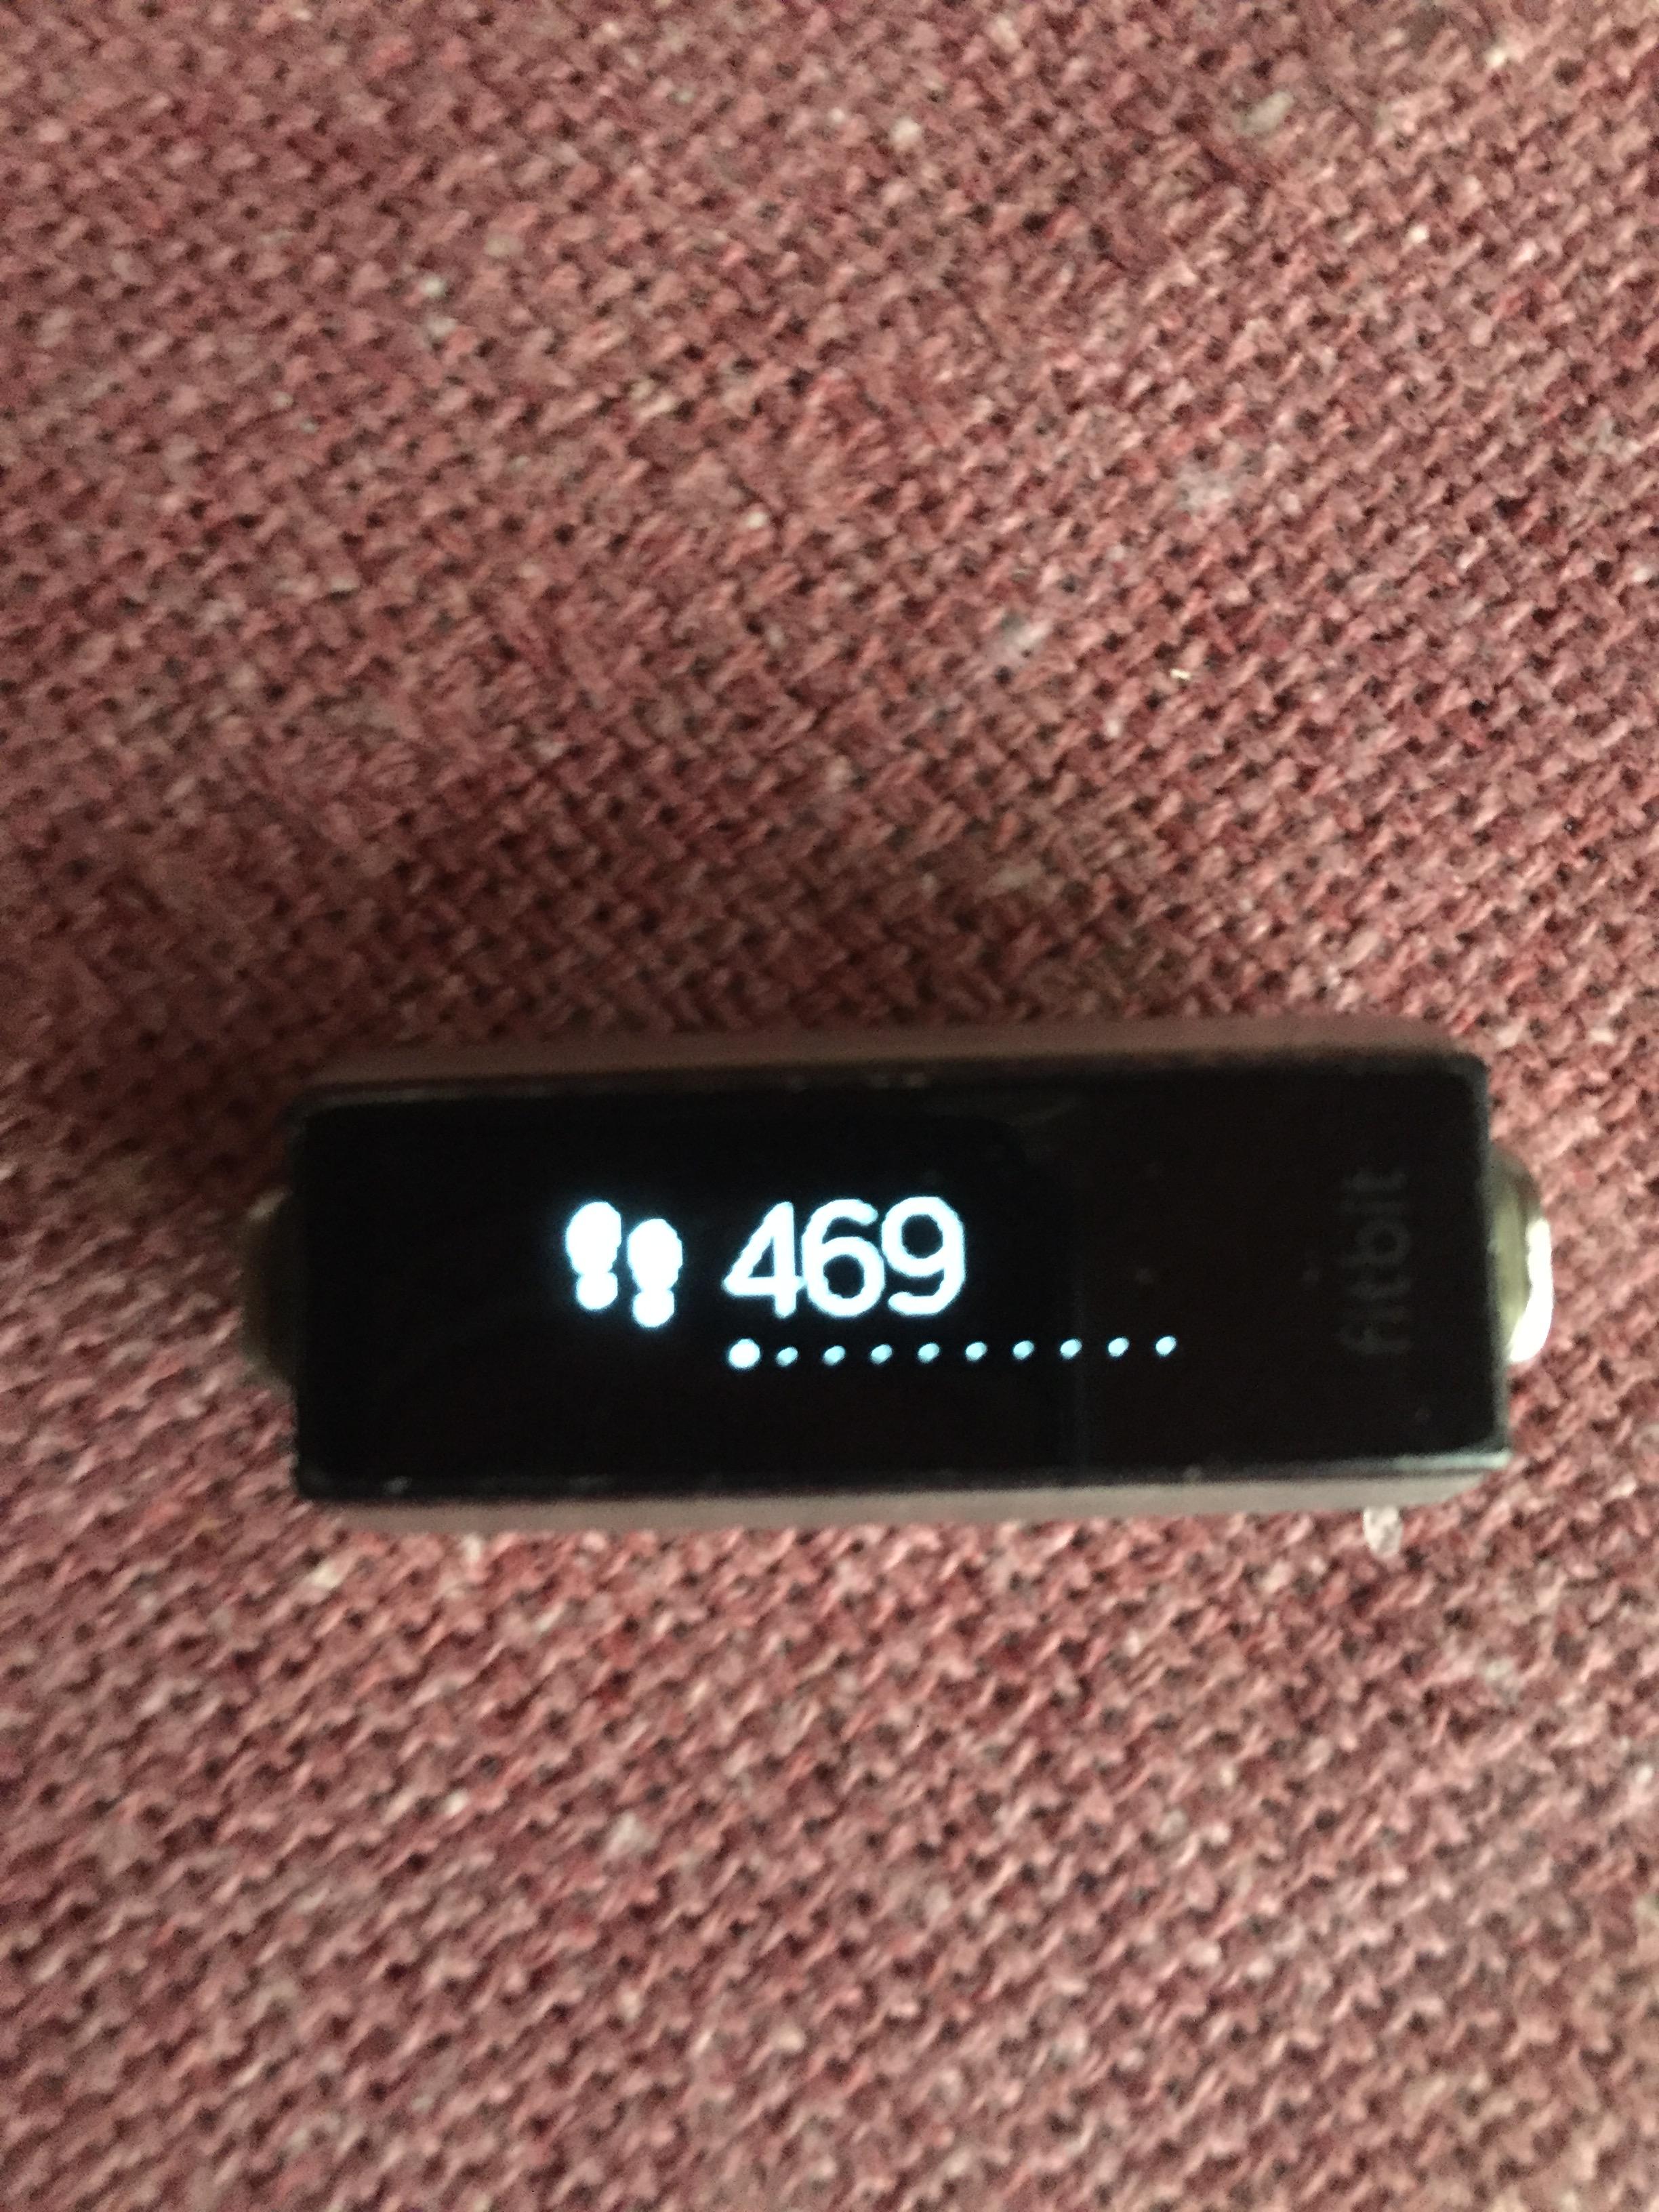 which fitbit has the largest font size